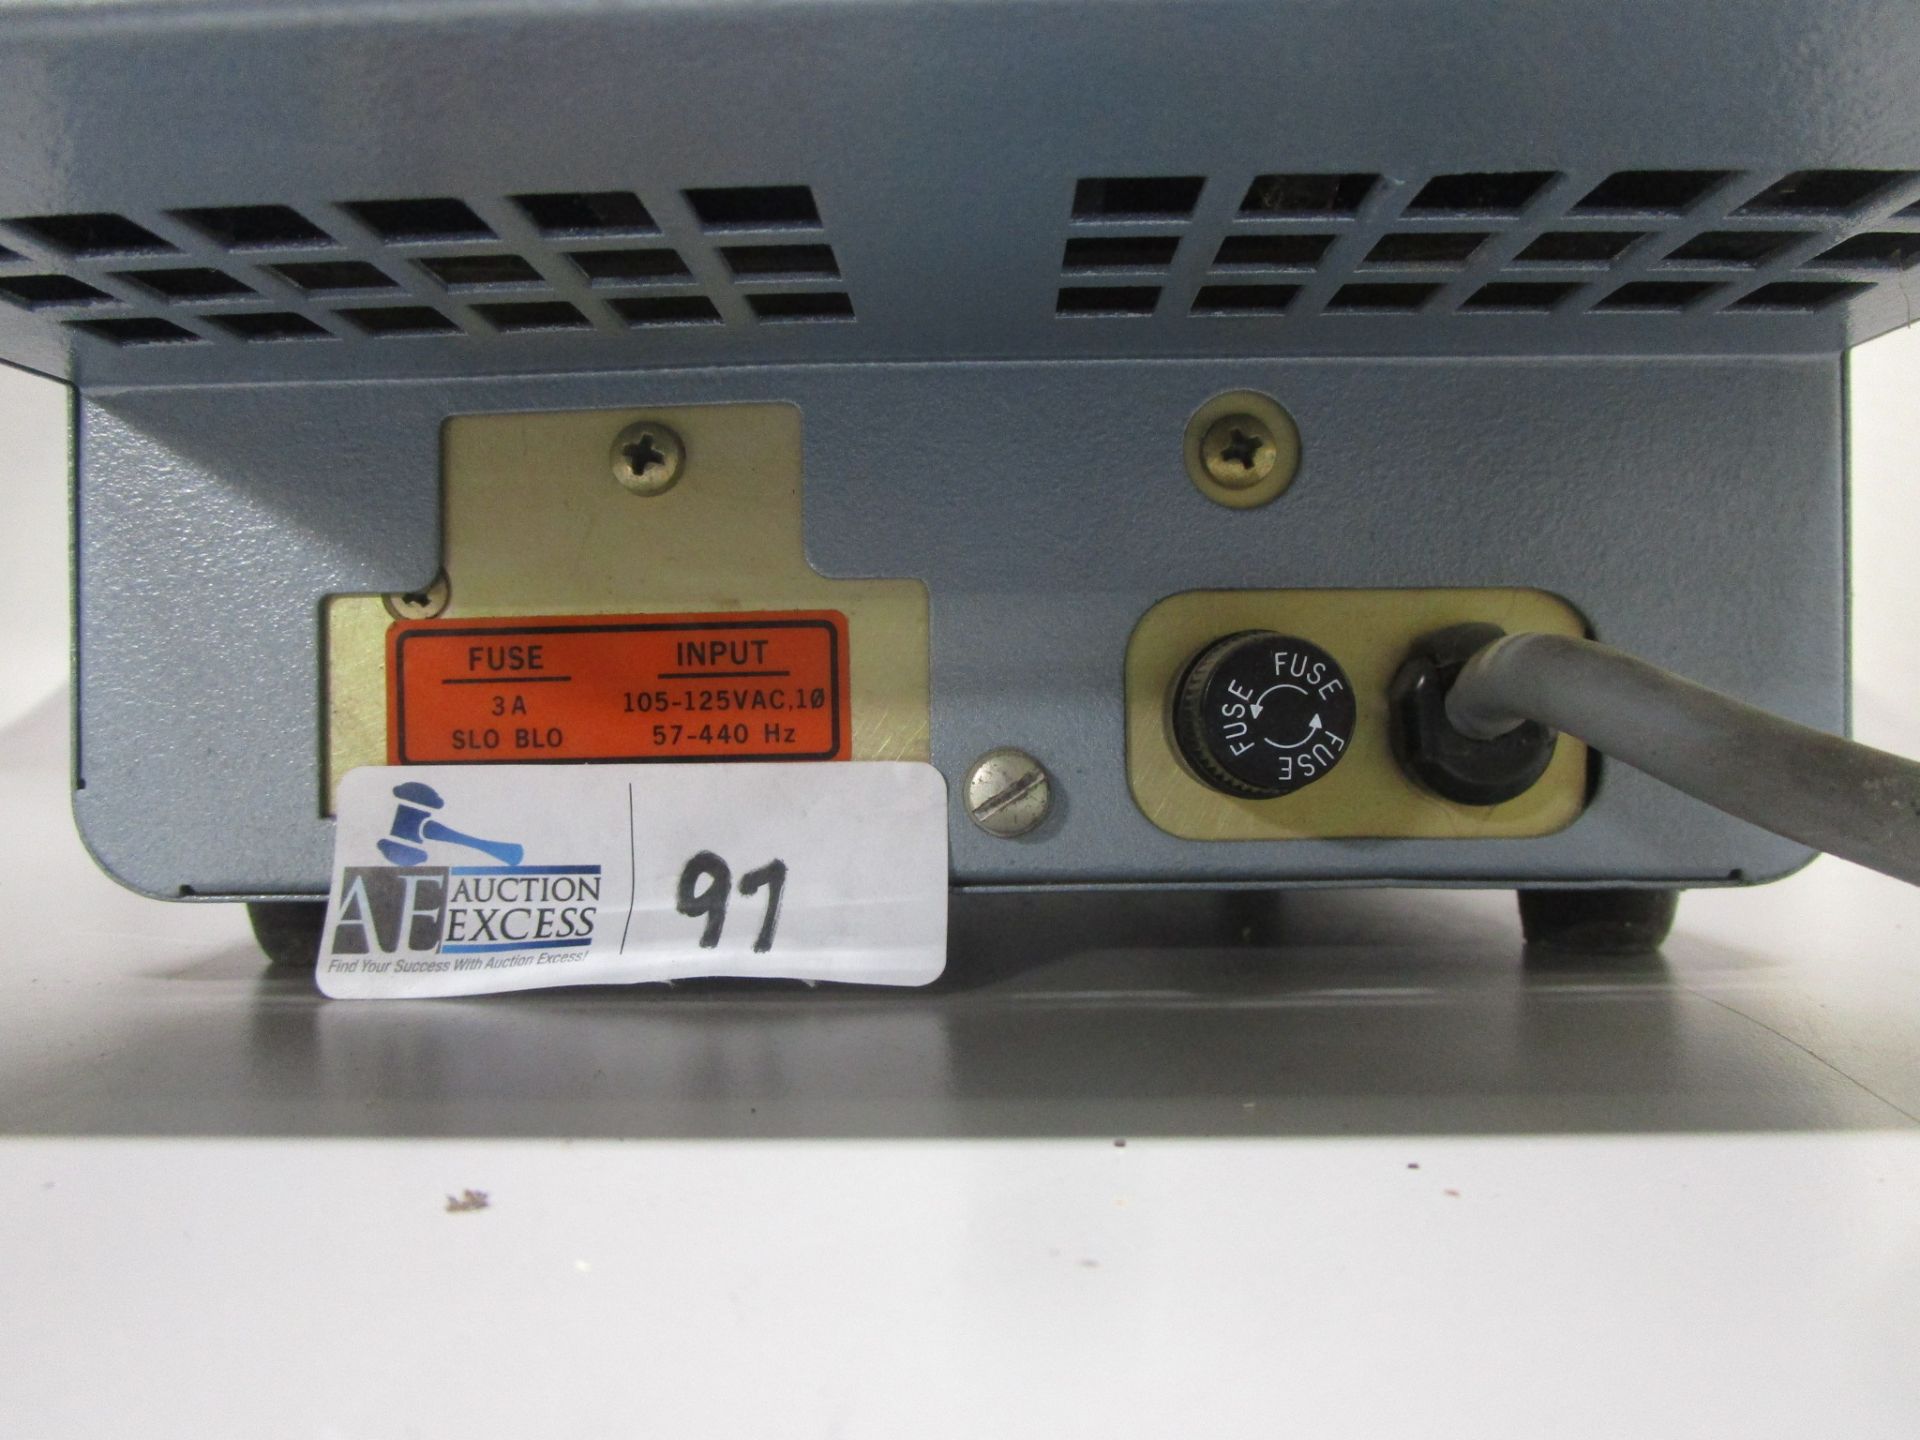 POWER DESIGNS INC.TRIPLE OUTPUT DC POWER SUPPLY MODEL TP325 - Image 2 of 2